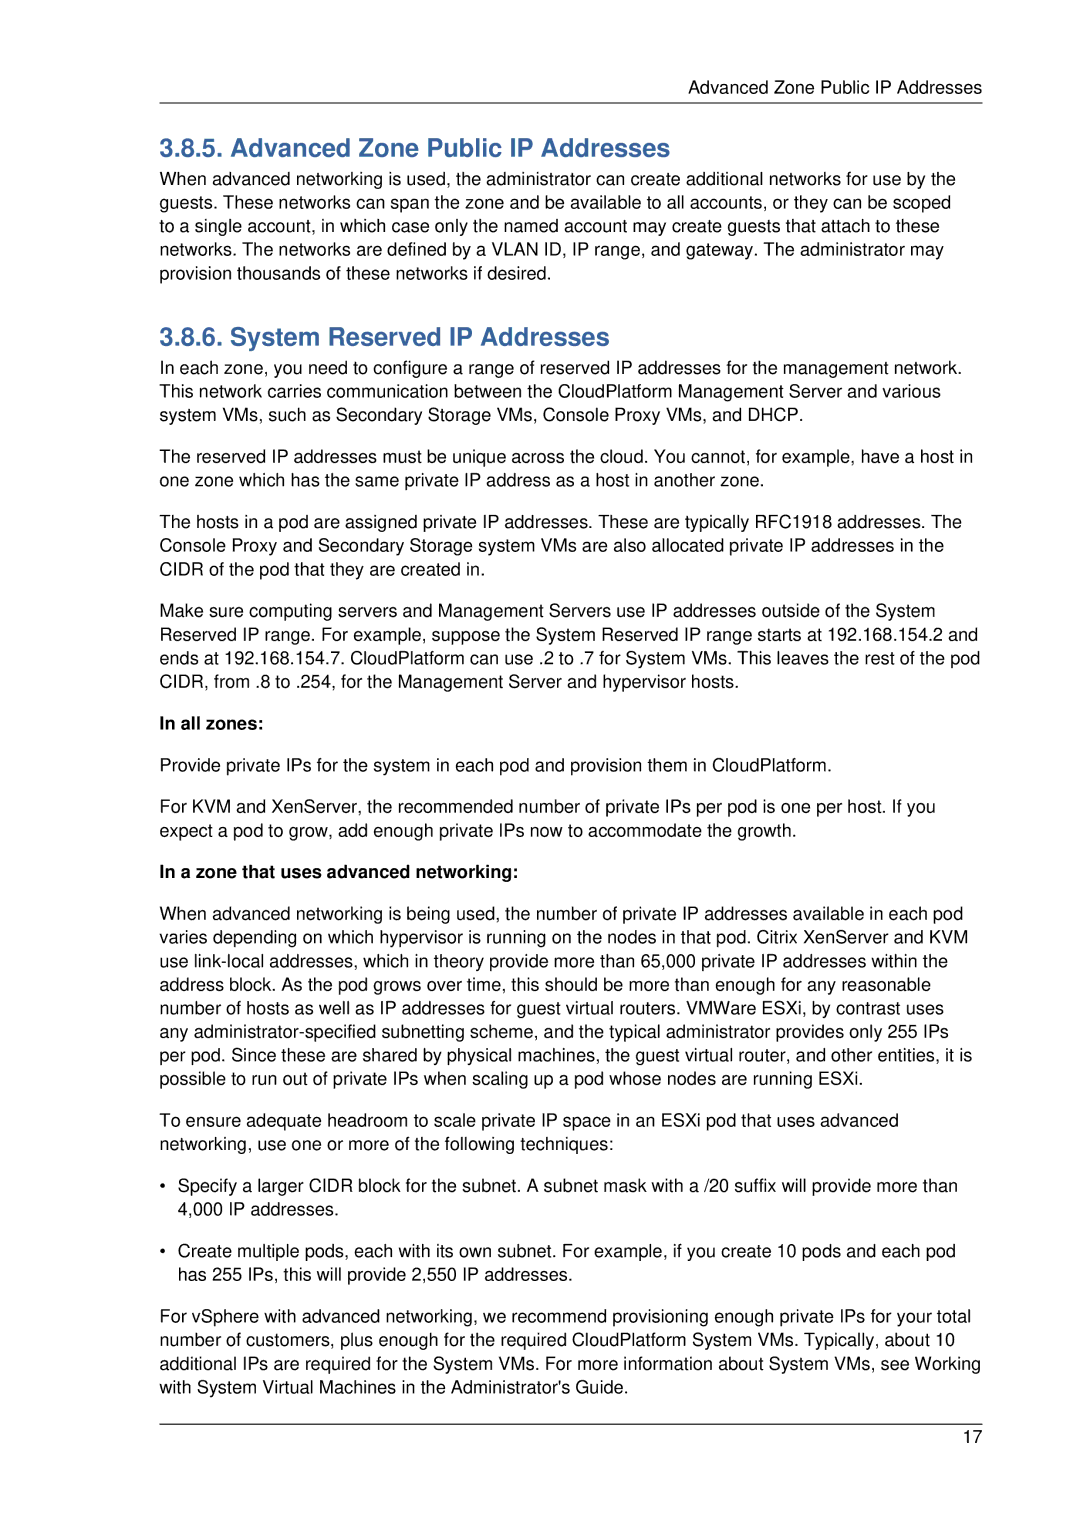 Citrix Systems 4.2 manual Advanced Zone Public IP Addresses, System Reserved IP Addresses, All zones 